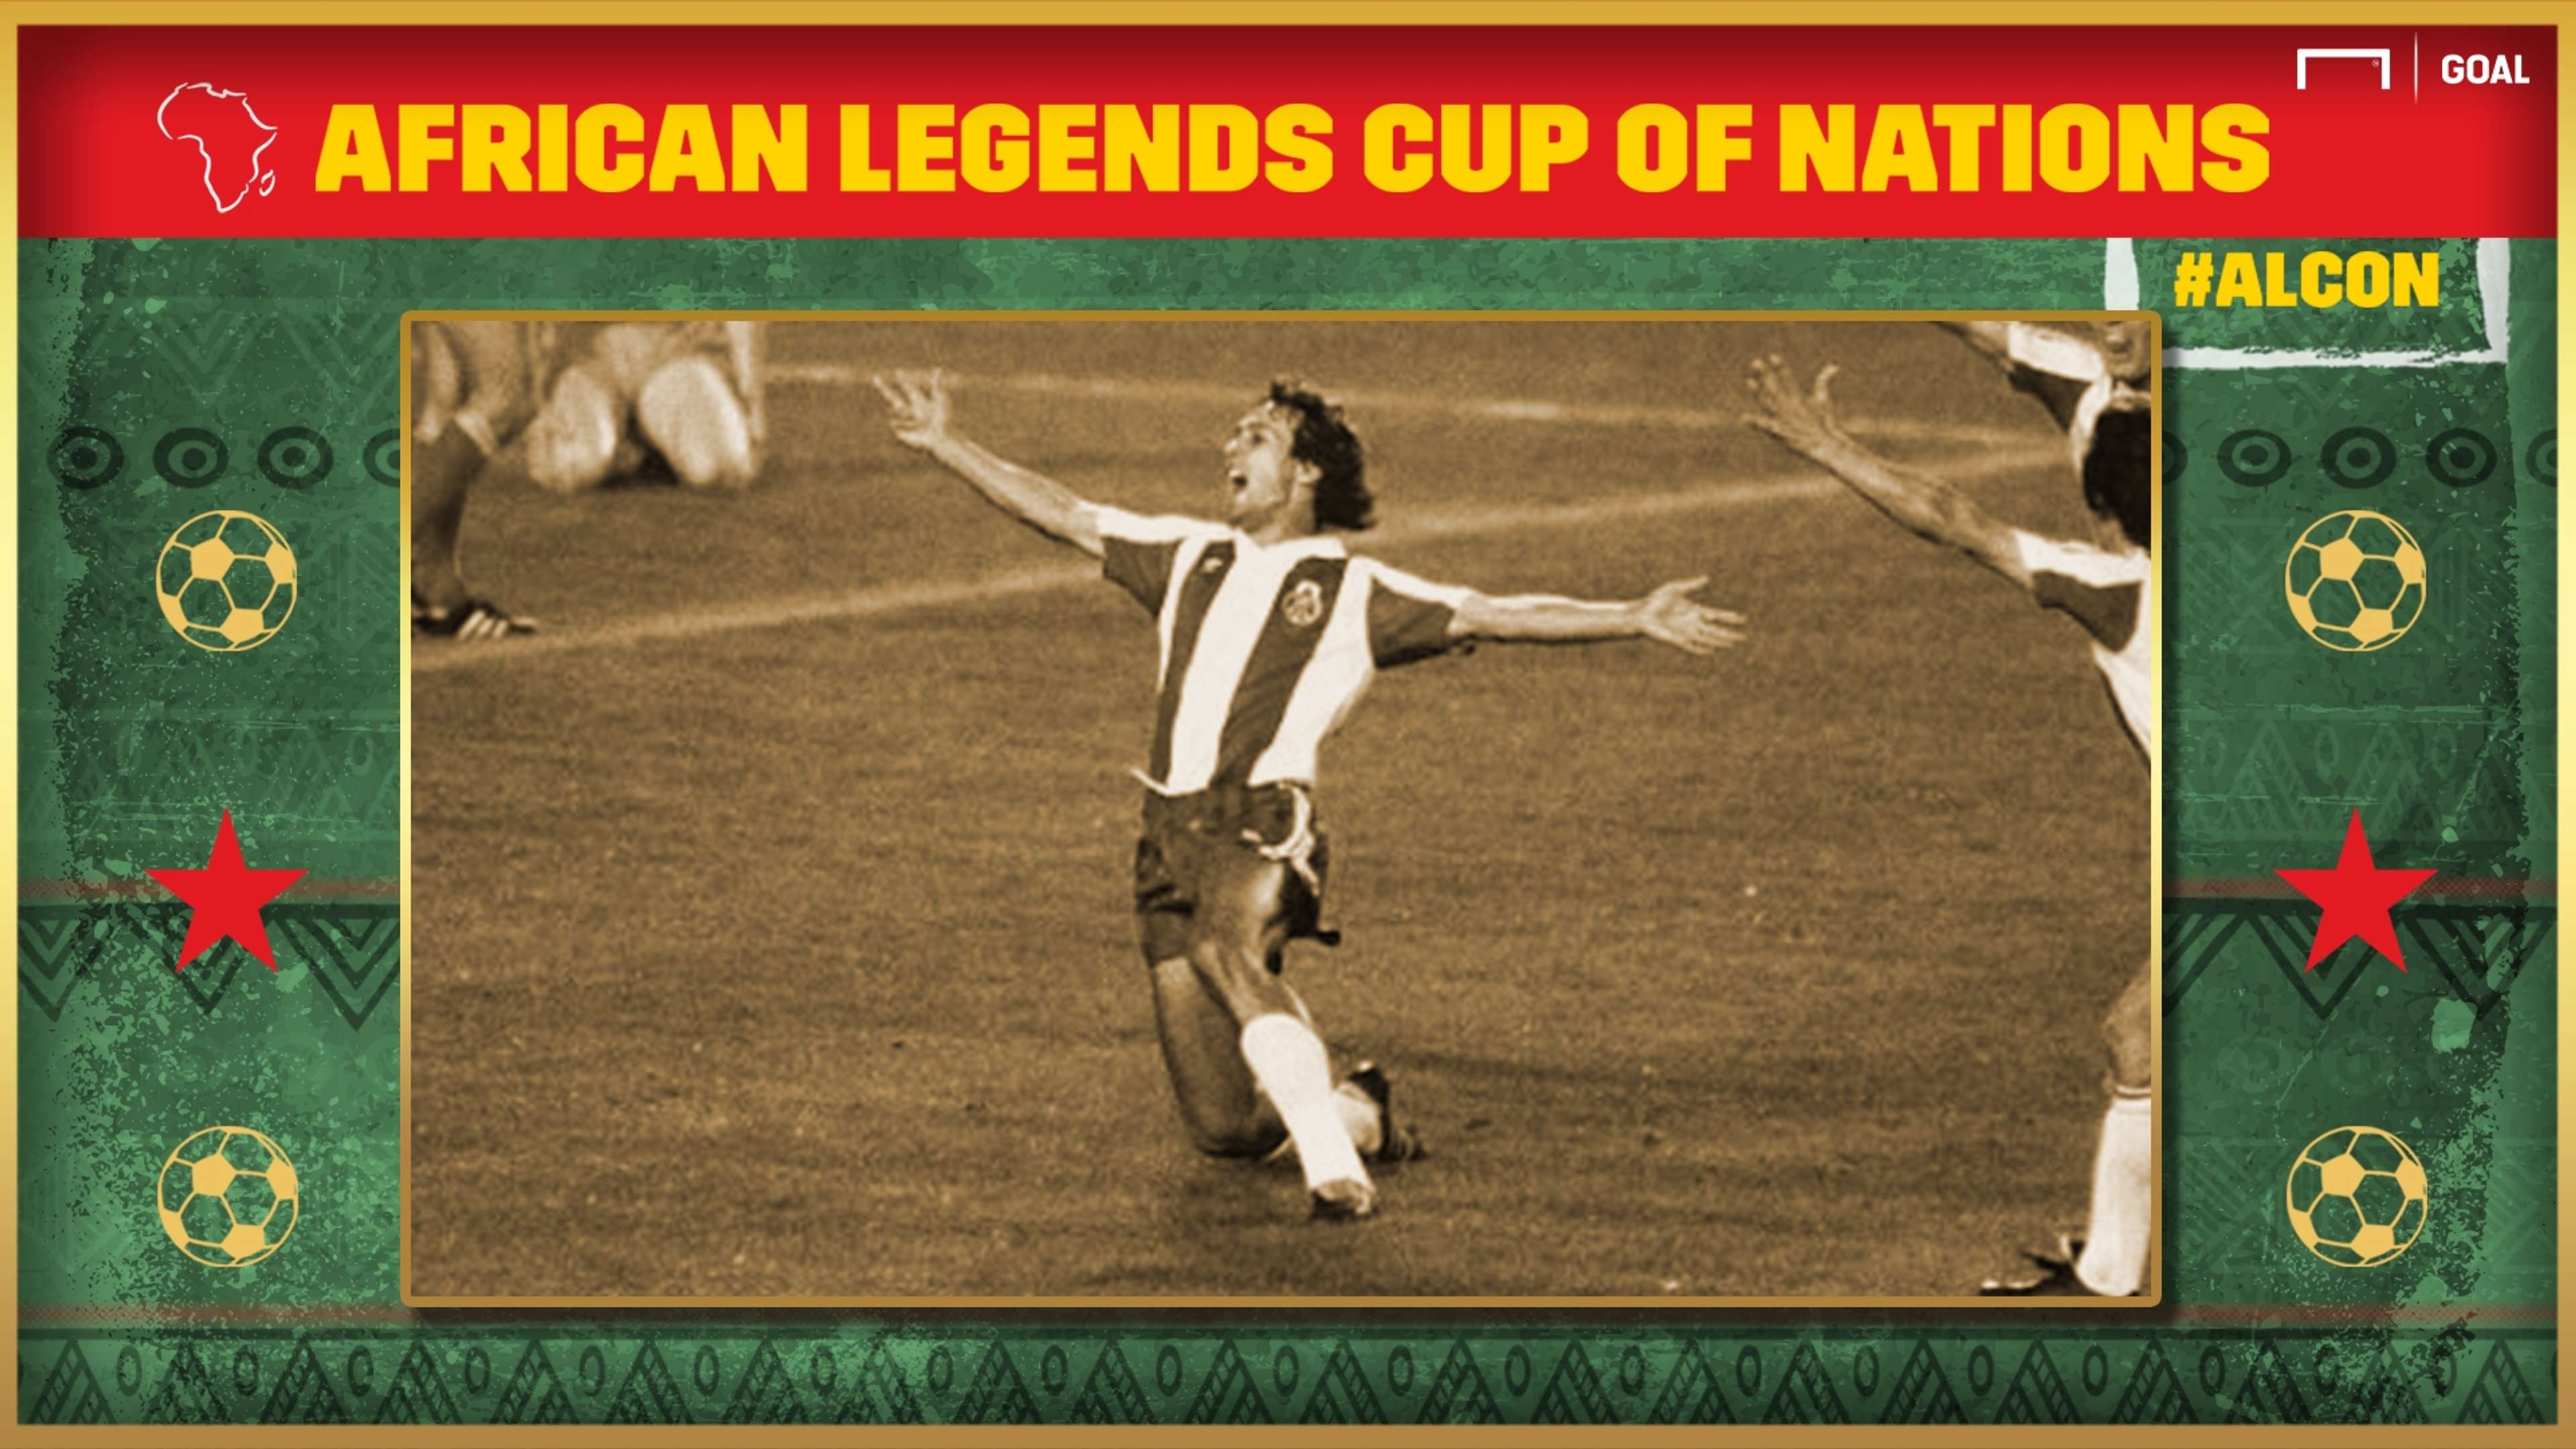 African Legends Cup of Nations: Rabah Madjer